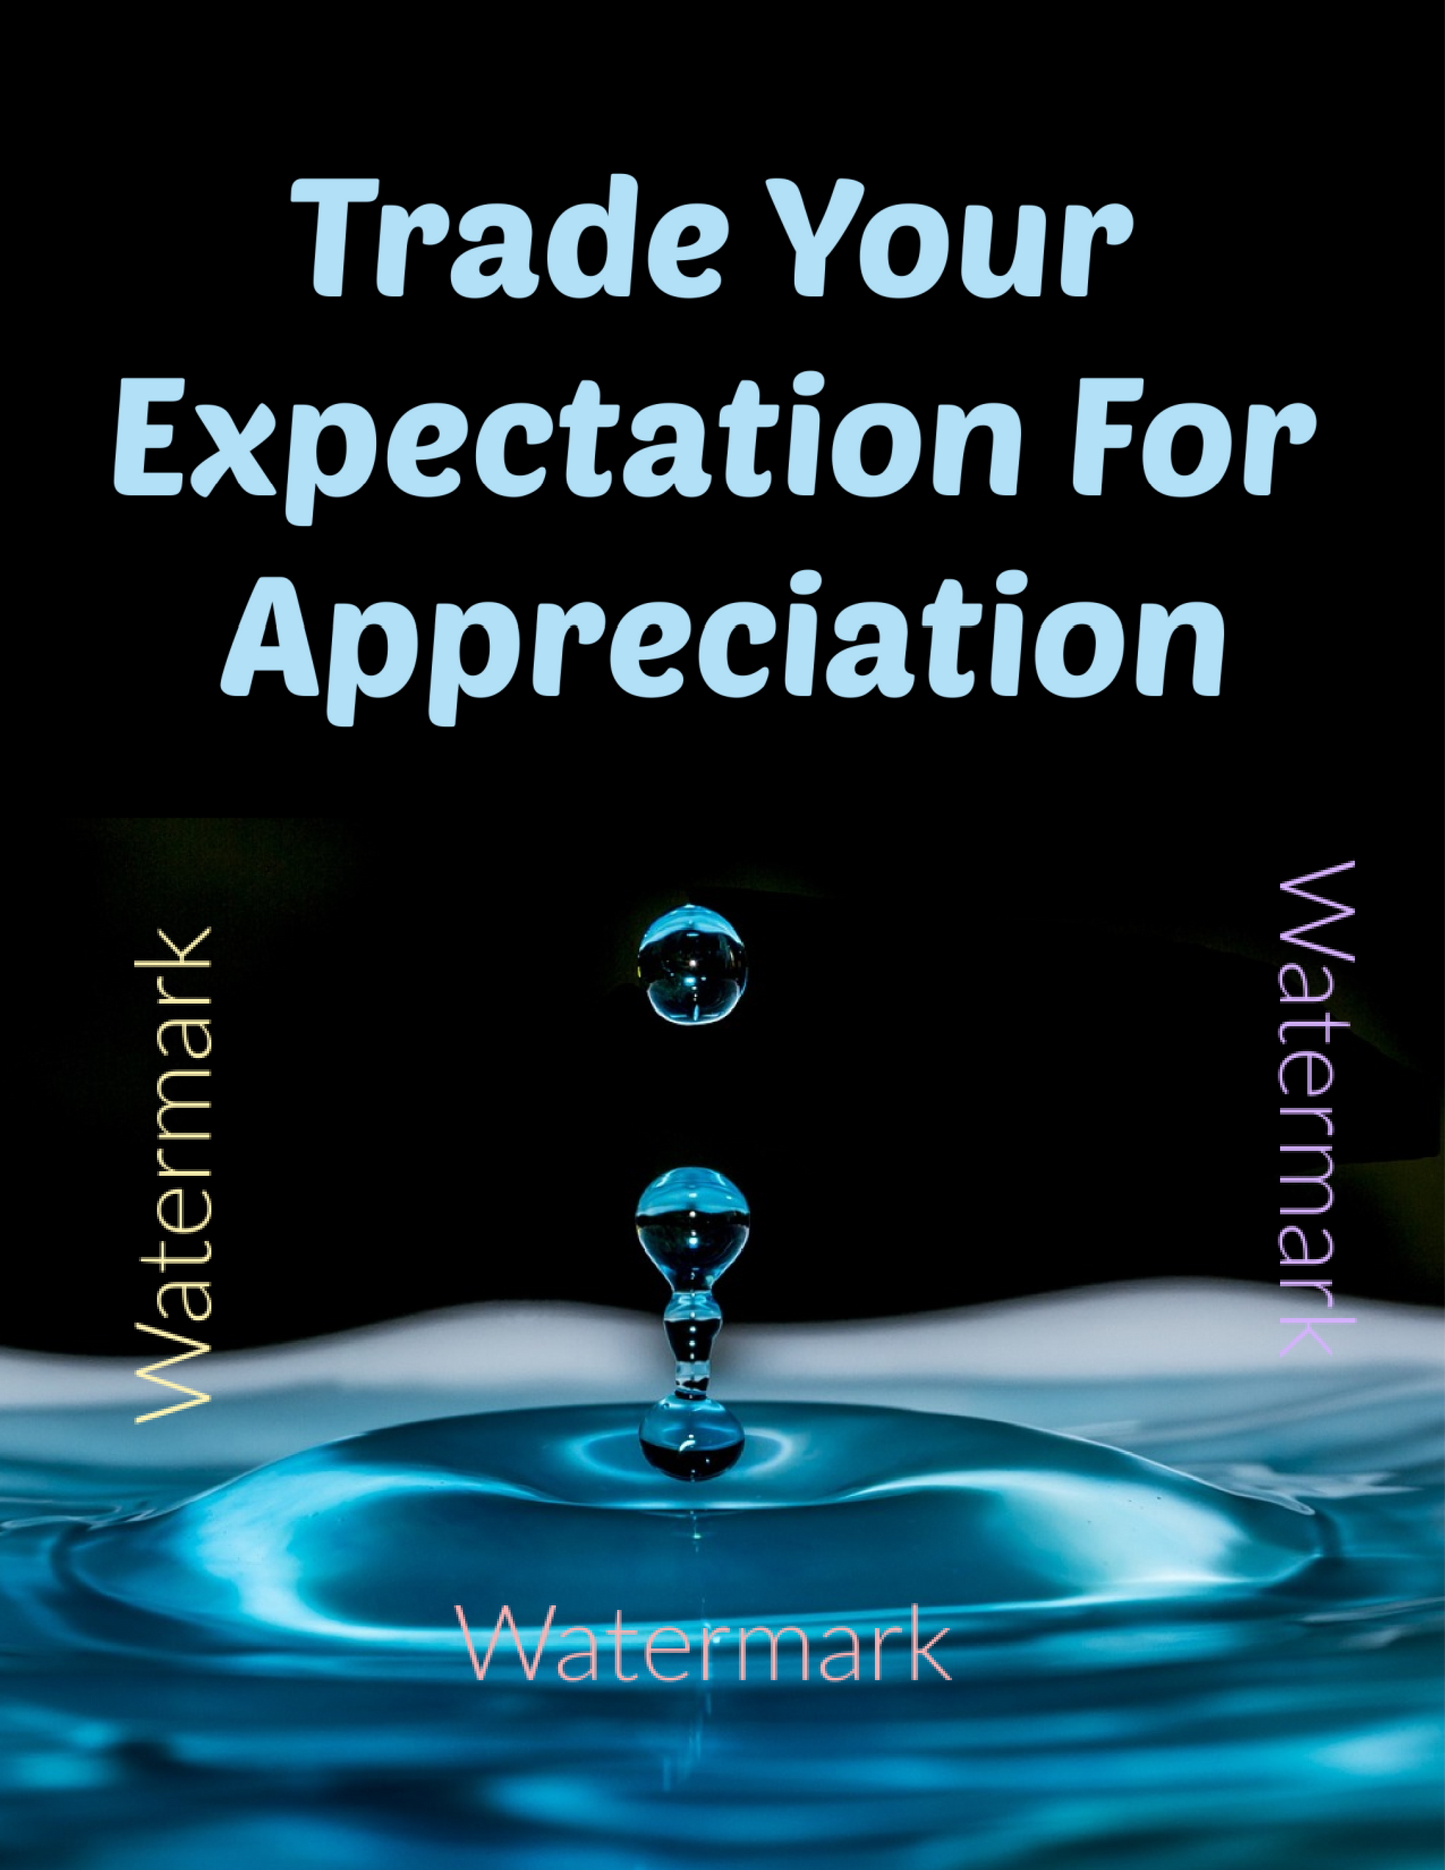 Wall Art - Tony Robbins Quote "Trade Your Expectation for Appreciation"